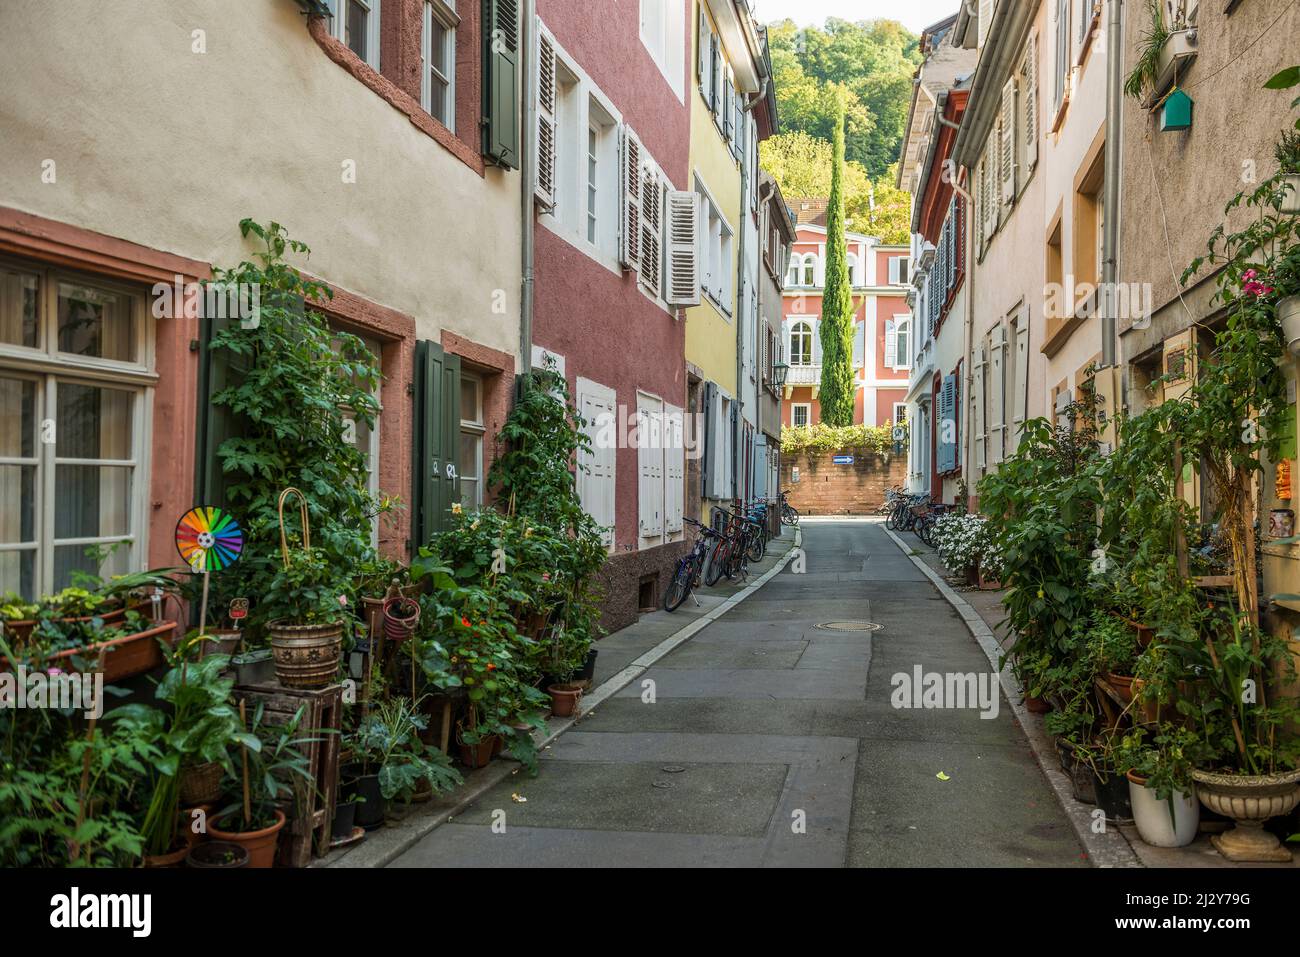 Alley with flowers in the old town, Heidelberg, Baden-Württemberg, Germany Stock Photo